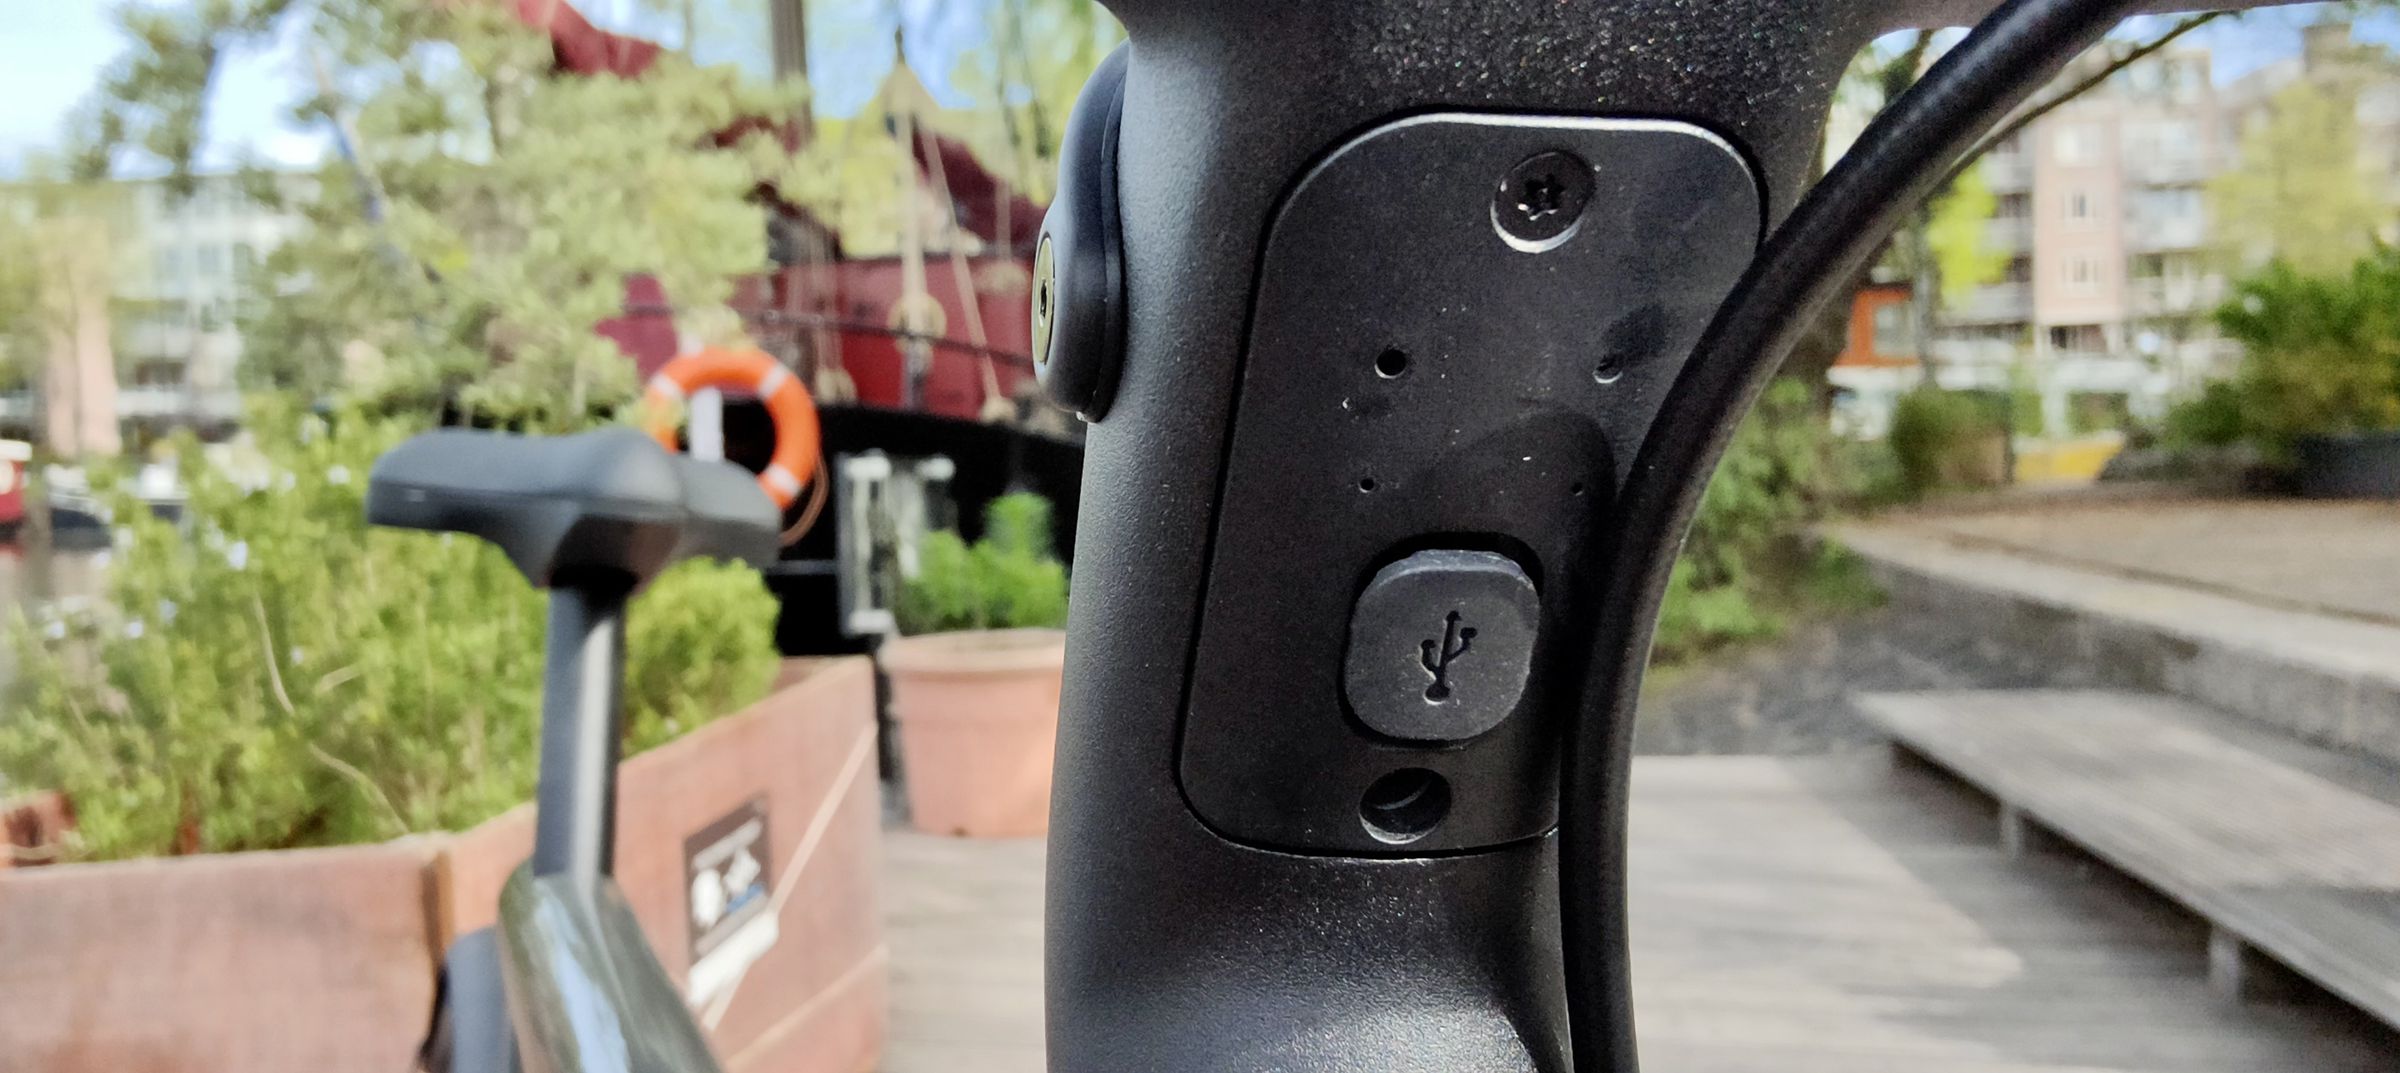 VanMoof e-bikes now have integrated mounts and USB-C charging for your phone.